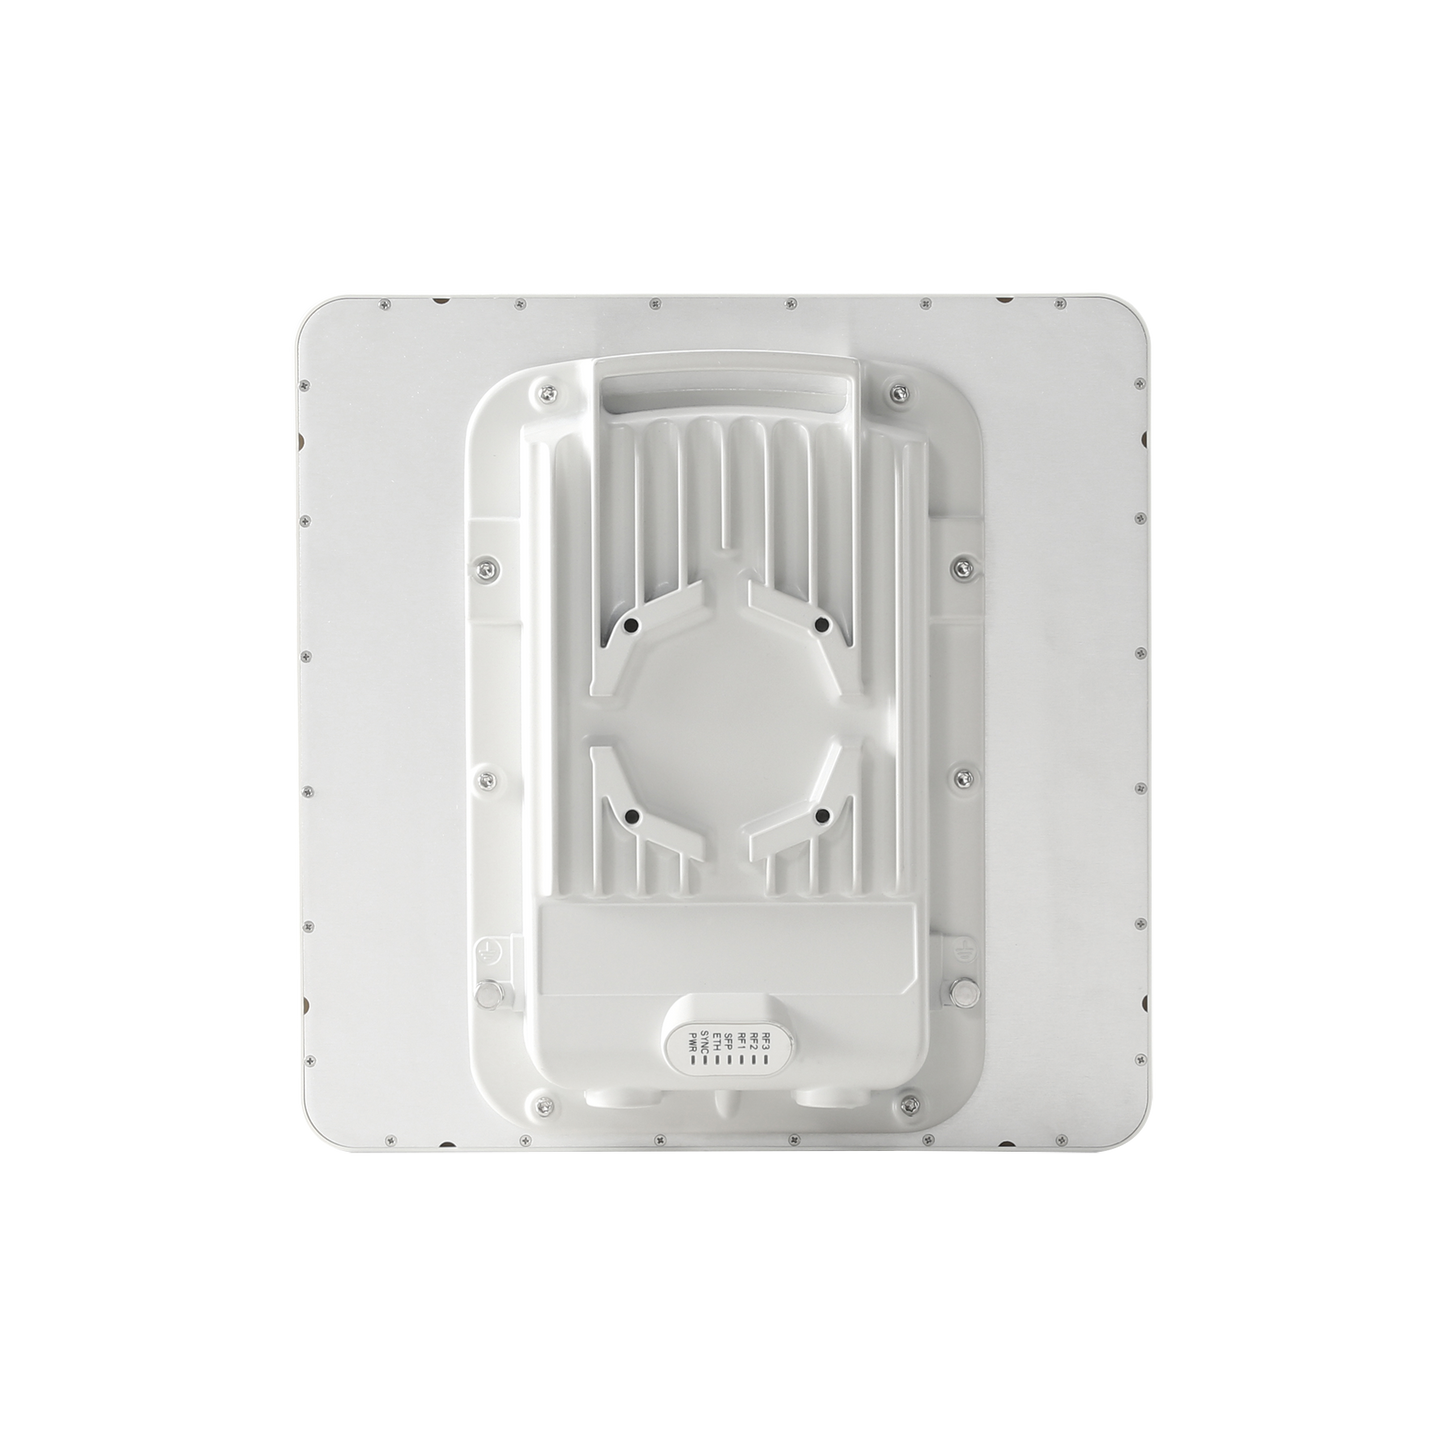 PTP-550  Up to 1.36 GBps / 4910 - 6200 GHz / 802.11 AC Wave 2  MU-MIMO 4: 4x4 / BackHaul with Built-in Antenna (High Gain 23 dBi) (C050055H016A)